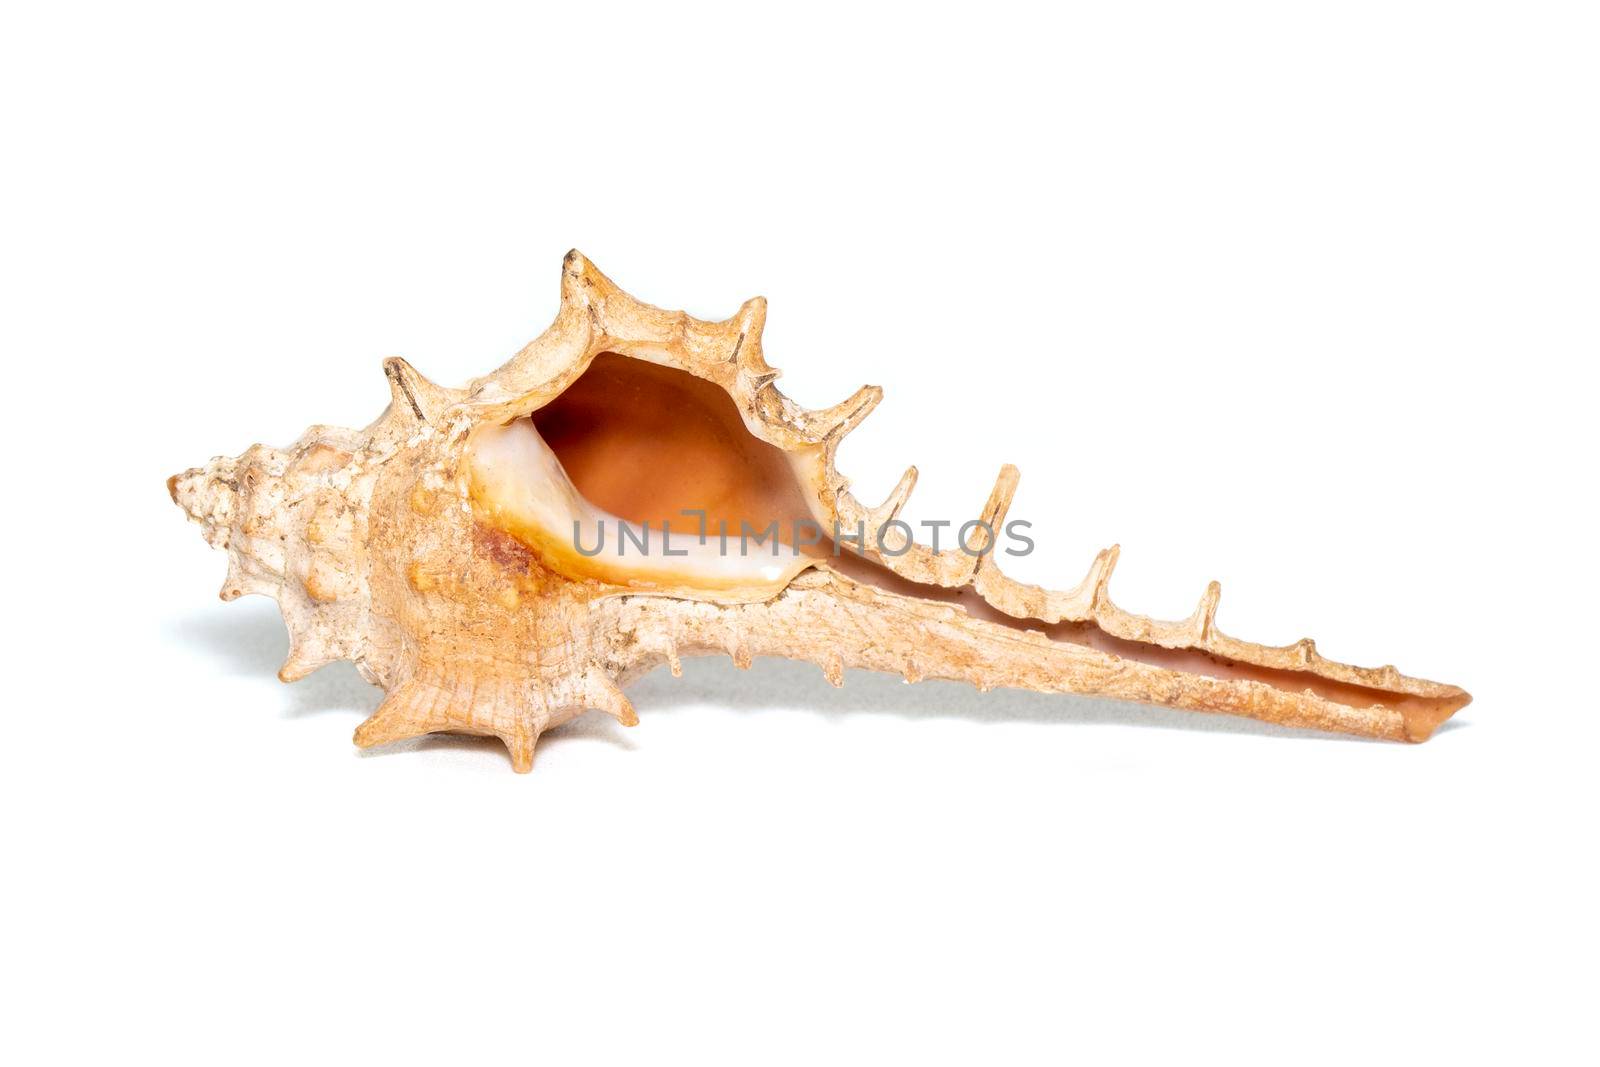 Image of thorn conch shell on a white background. Undersea Animals. Sea shells. by yod67